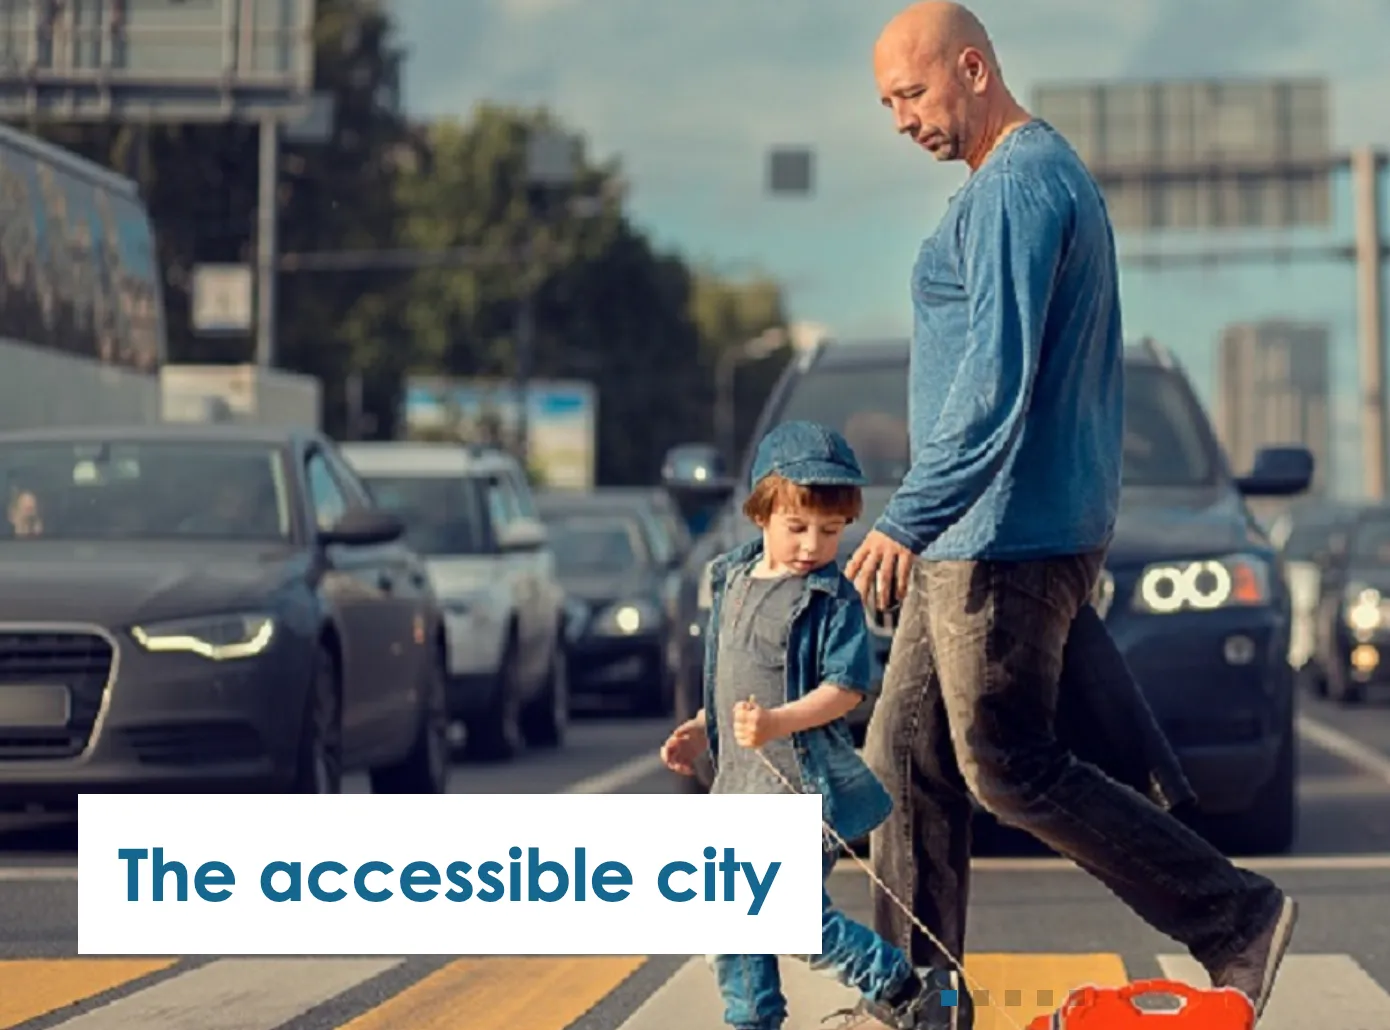 The accessible city WeCity is creating